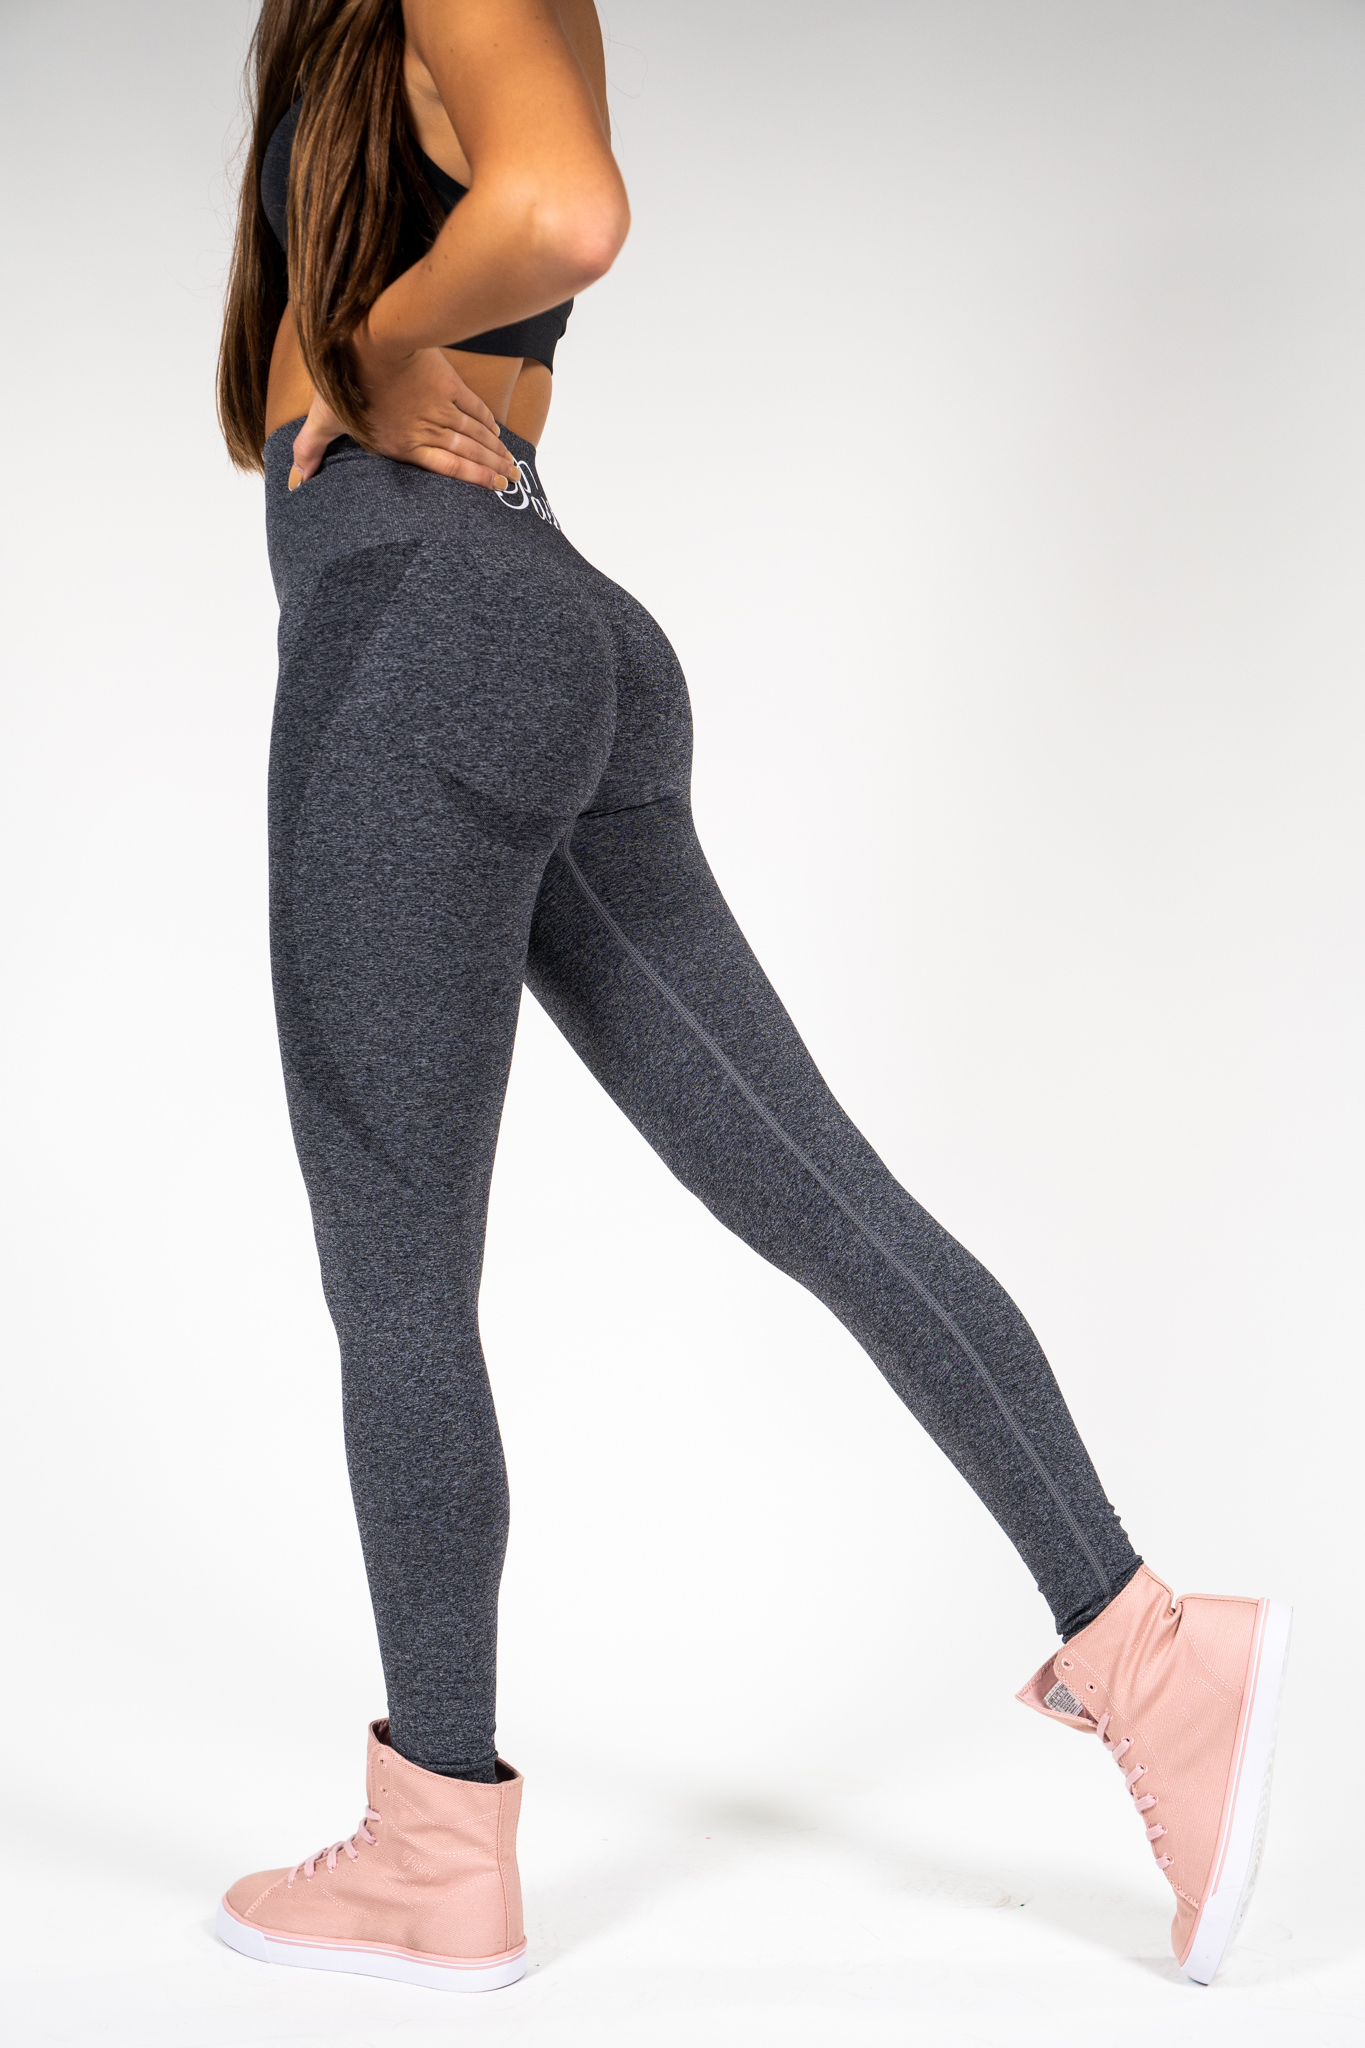 Woman wearing Pastry Seamless Leggings Black Speckled Marl side view